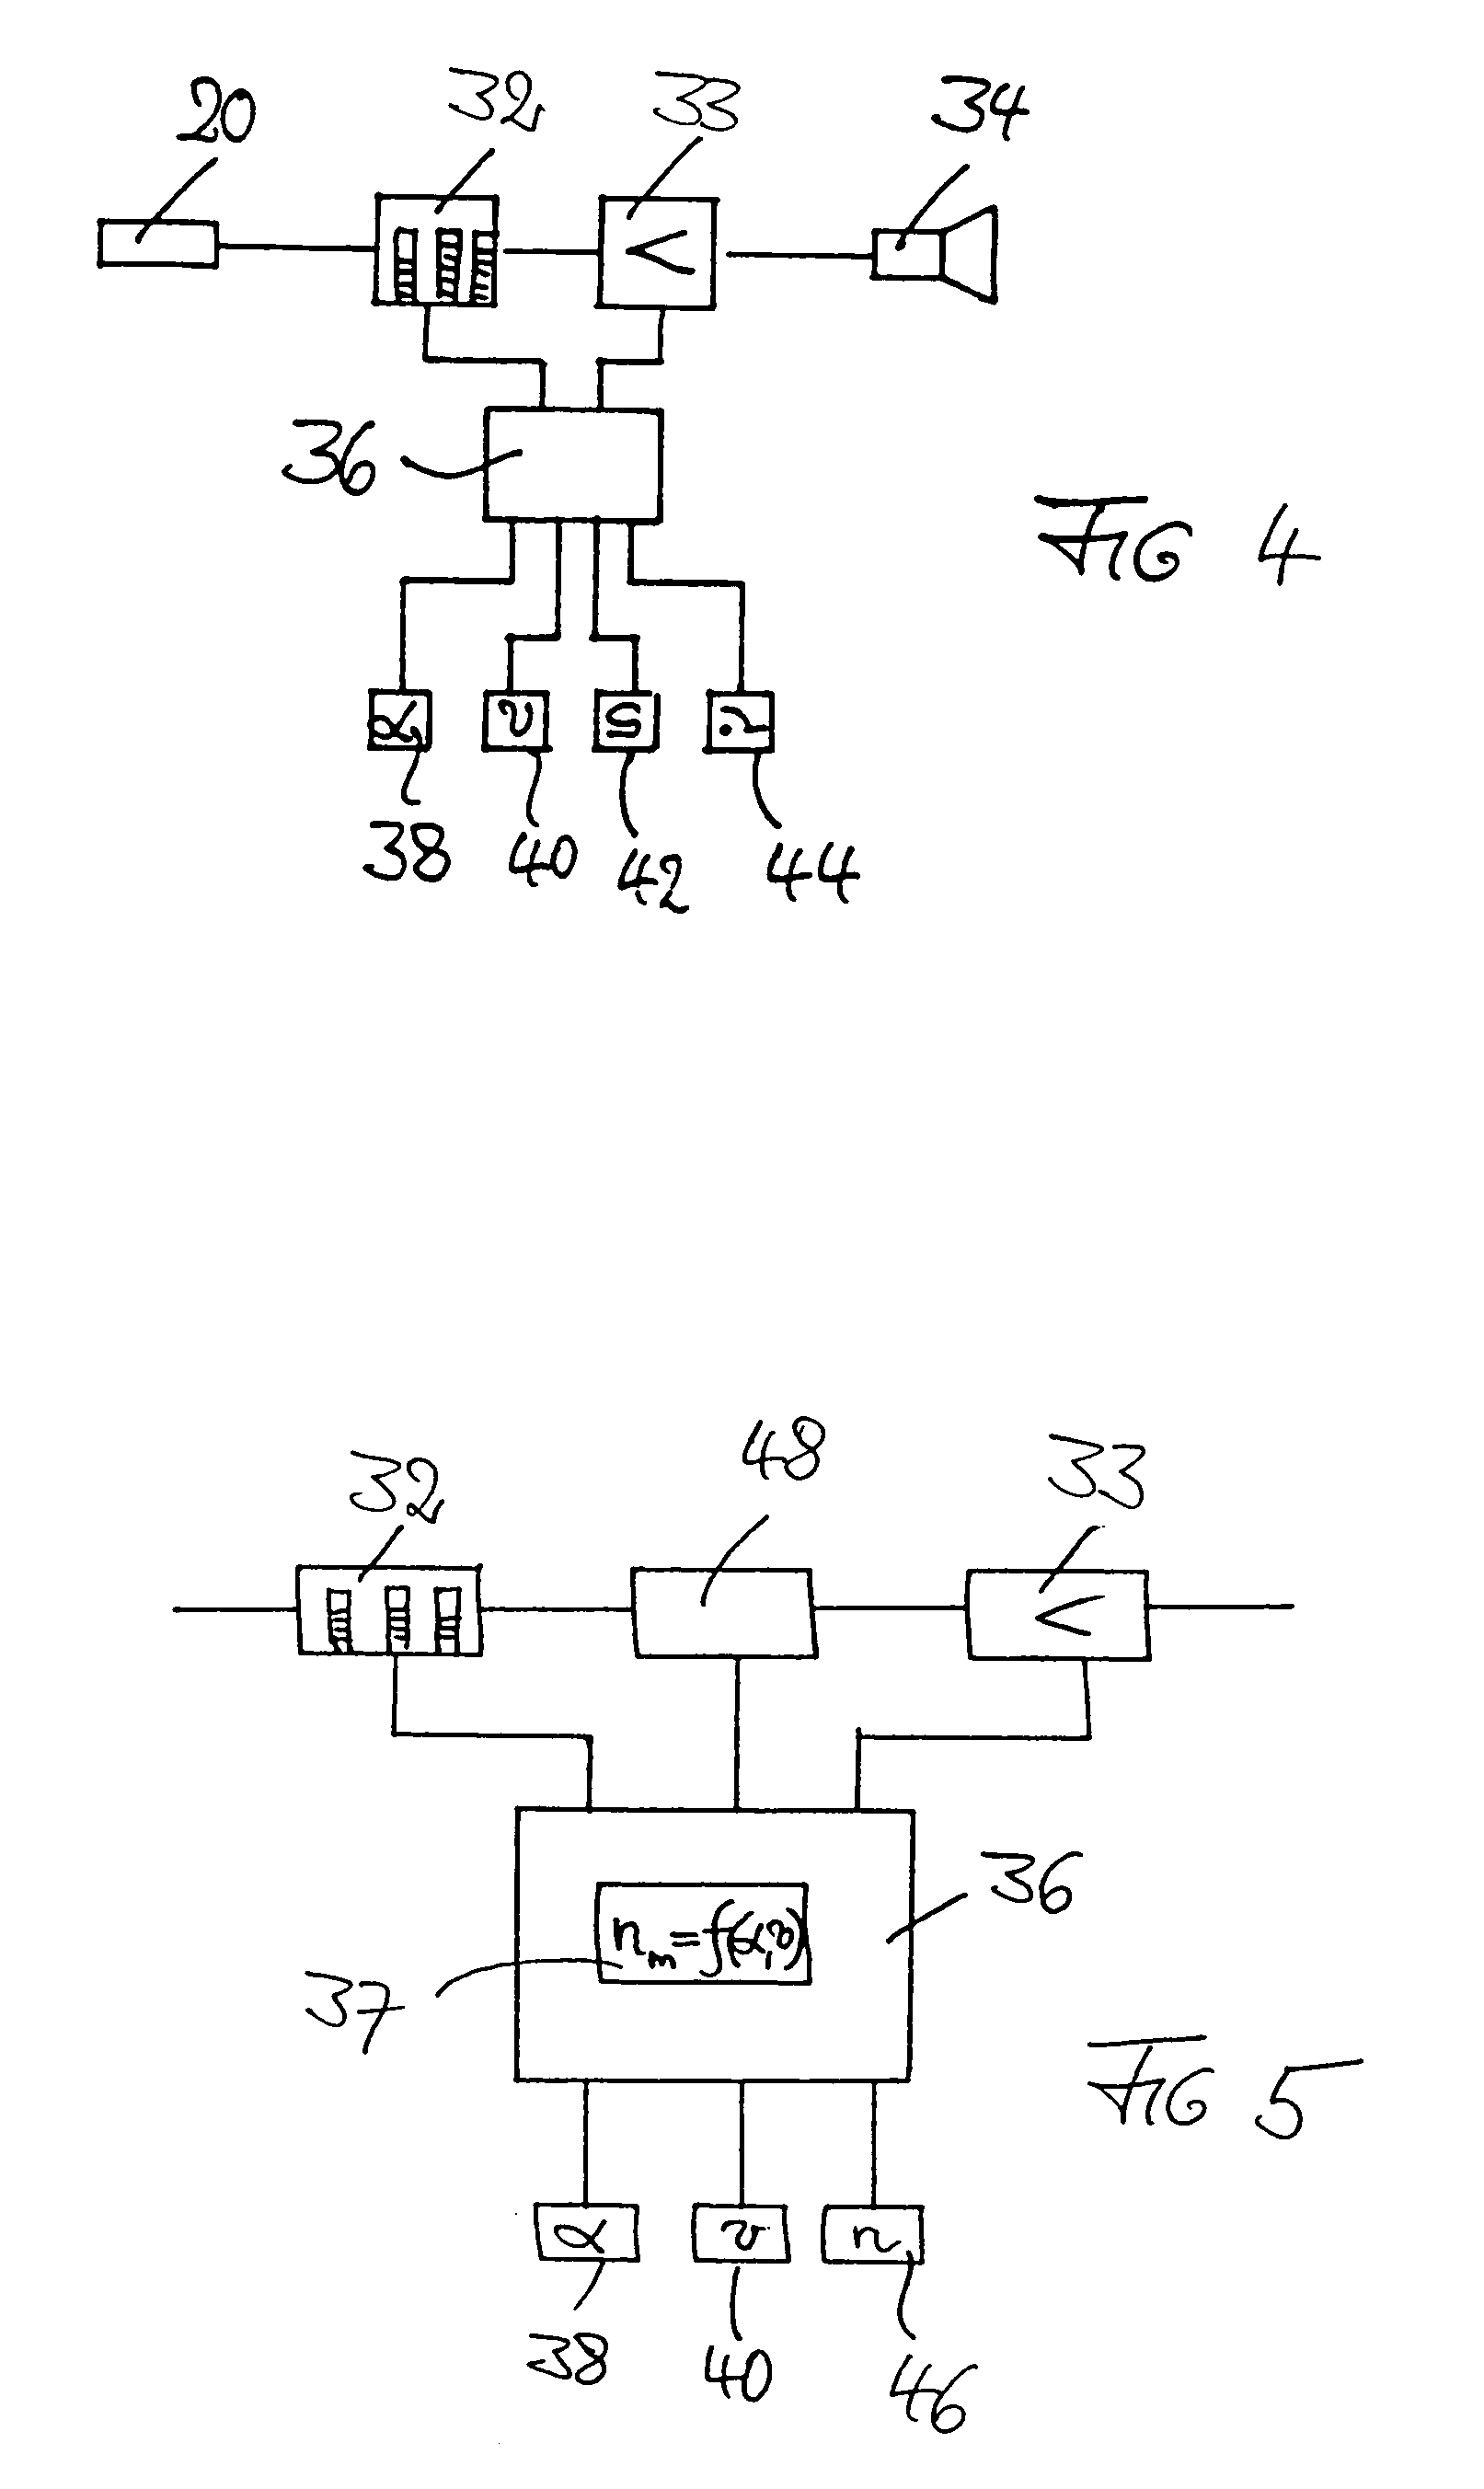 Method and apparatus for producing sounds that depend on the operation of an internal combustion engine in the interior space of a motor vehicle